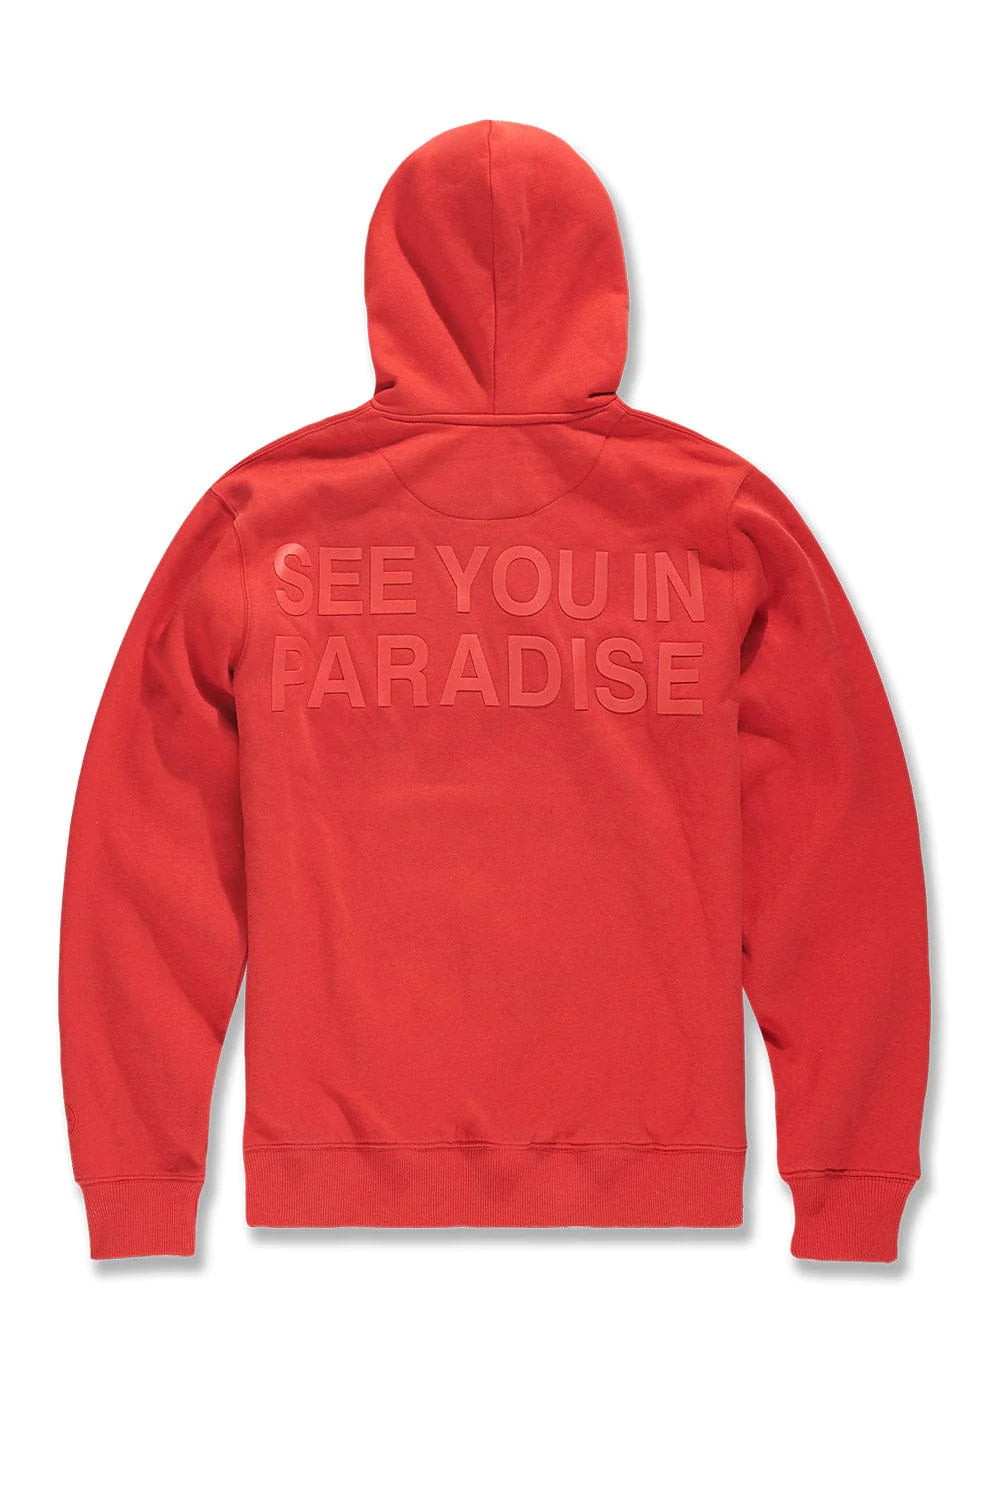 PARADISE TONAL PULLOVER HOODIE - RED (8550H)